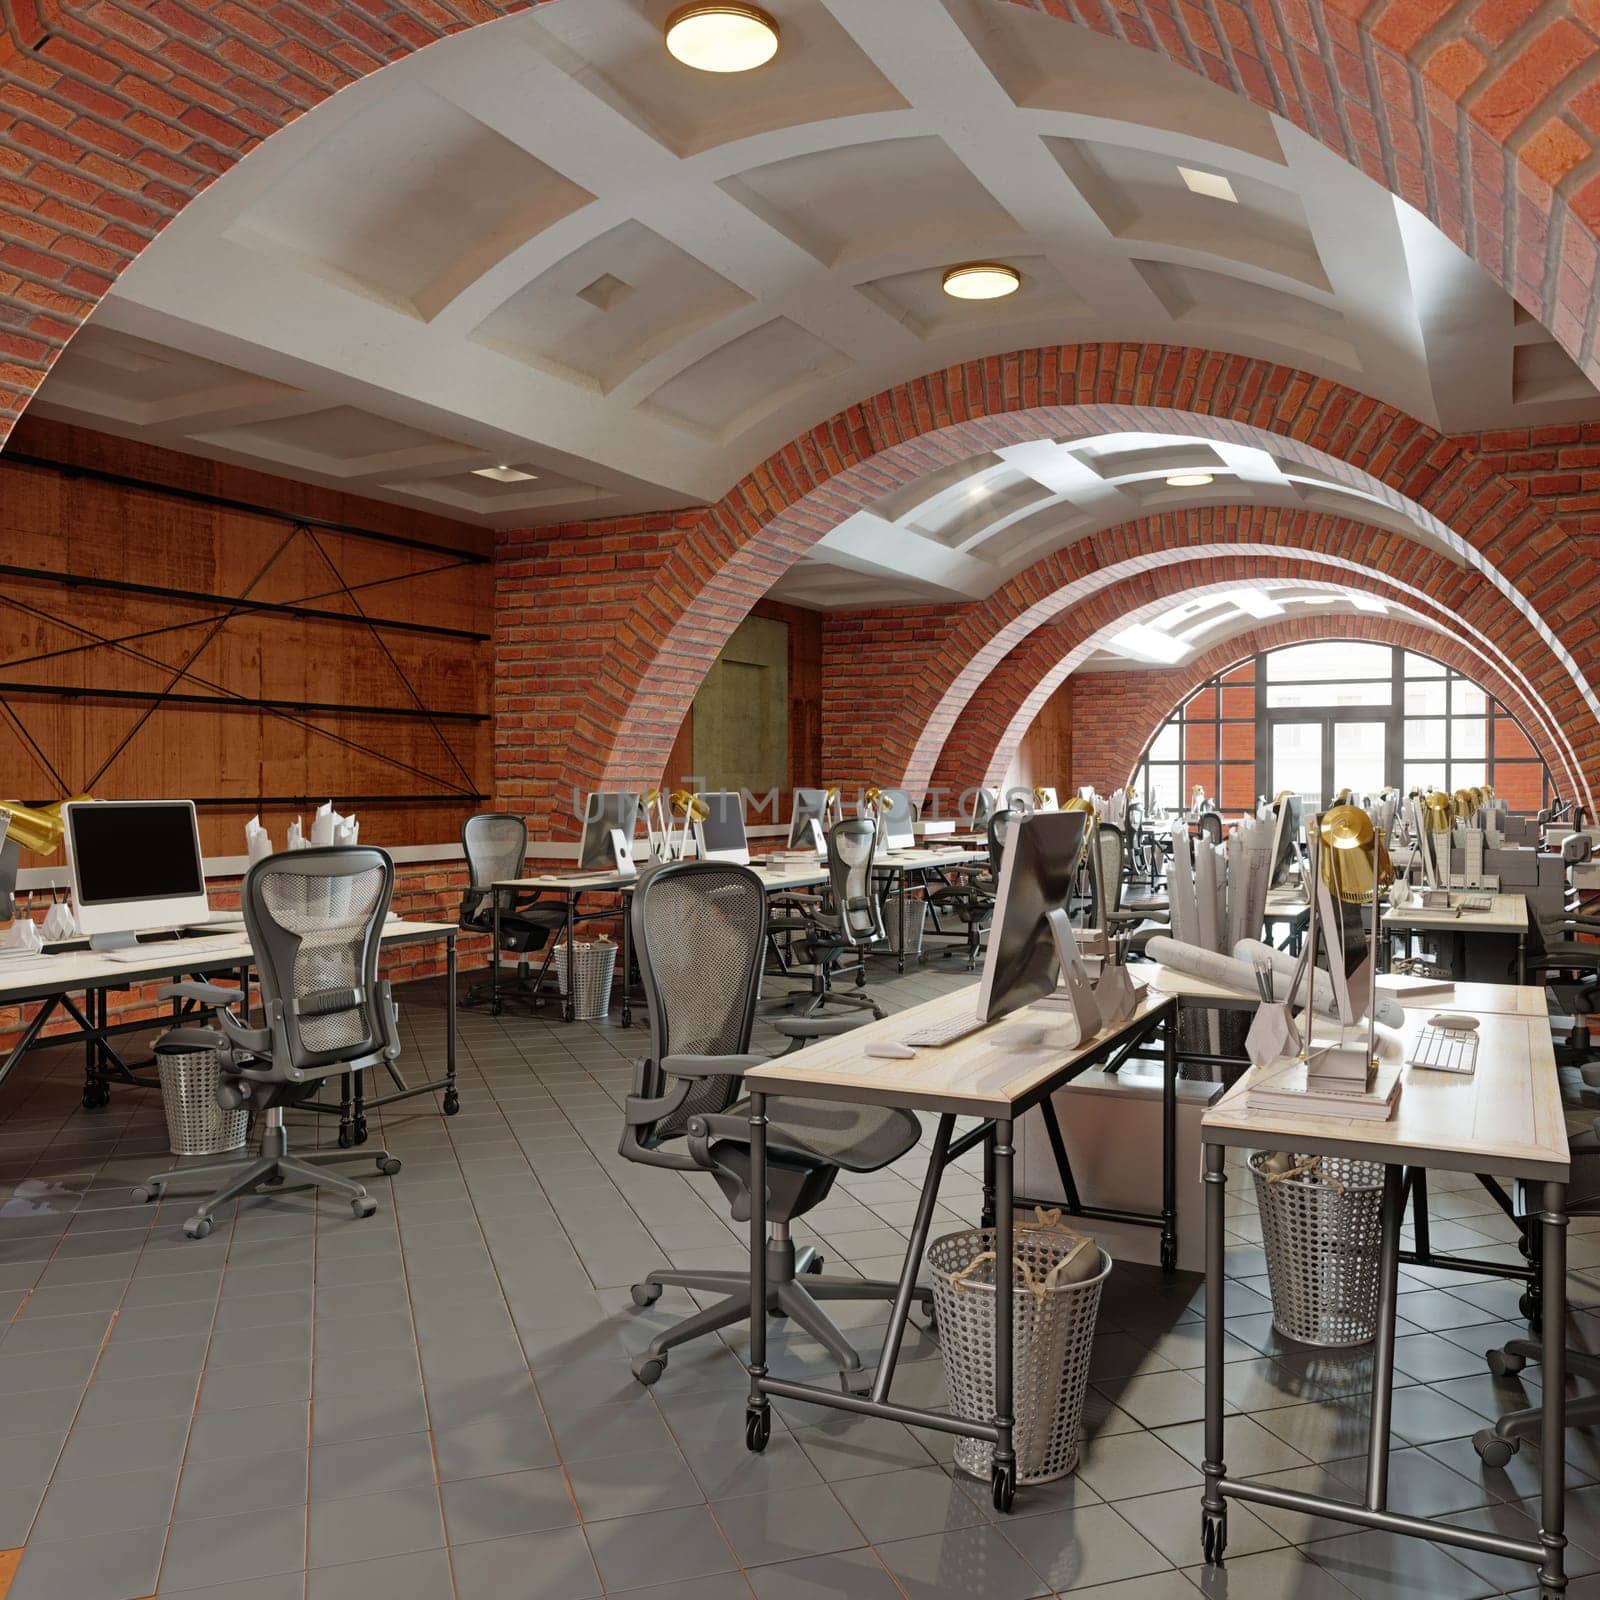 Interior of a modern office with brick walls by vicnt